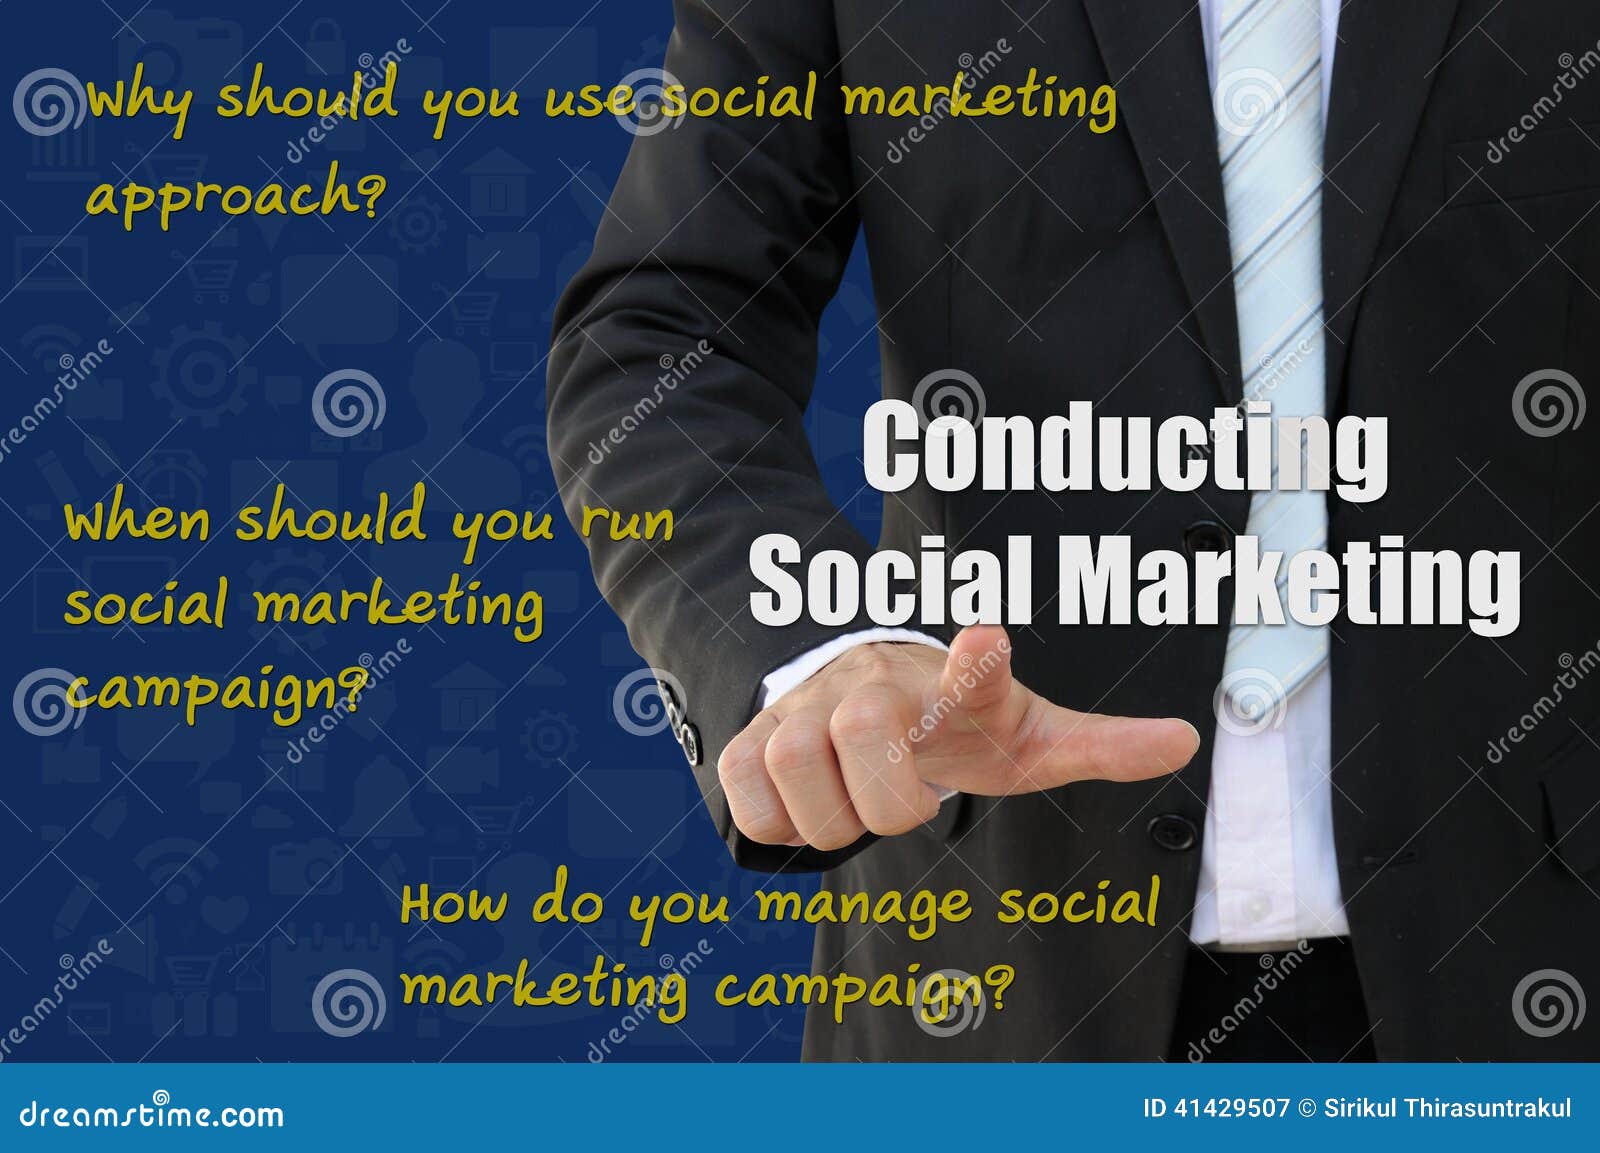 how to conduct social marketing campaign